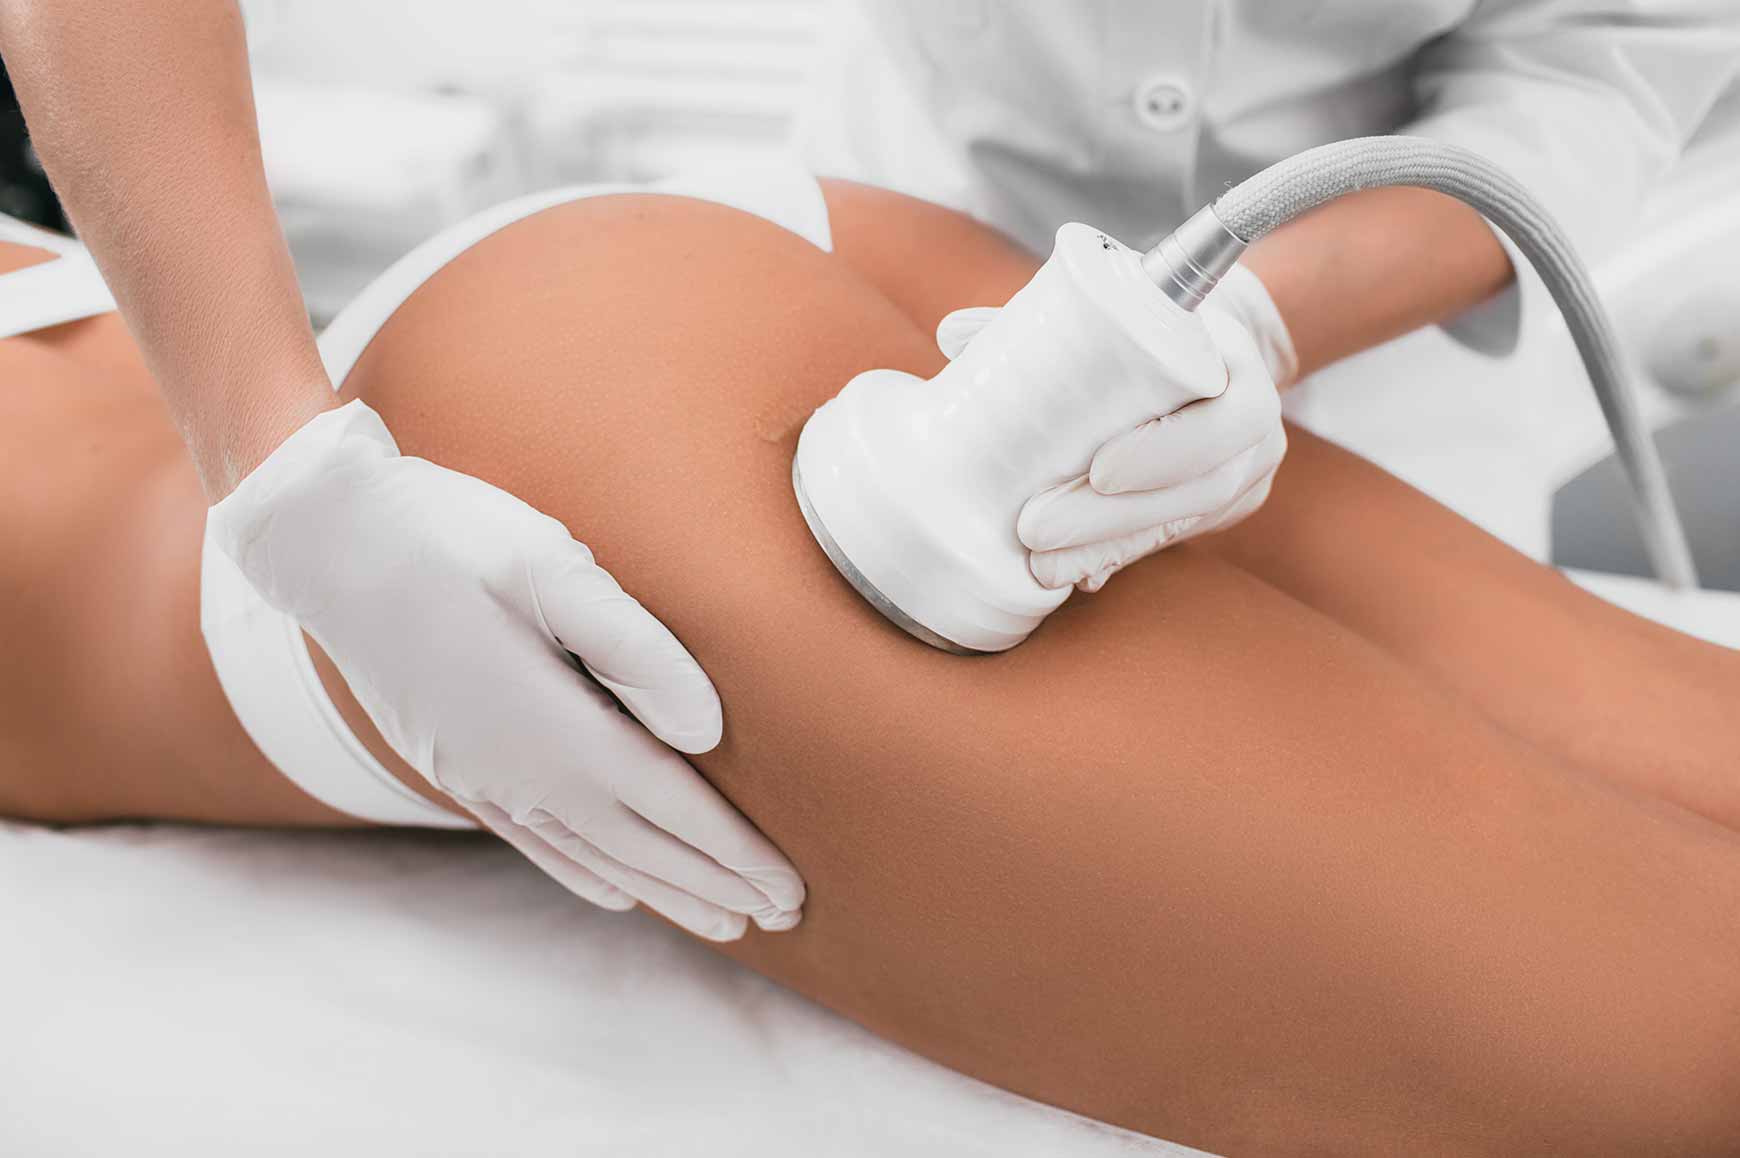 The two most common types of body contouring procedures include fat grafting and liposuction.